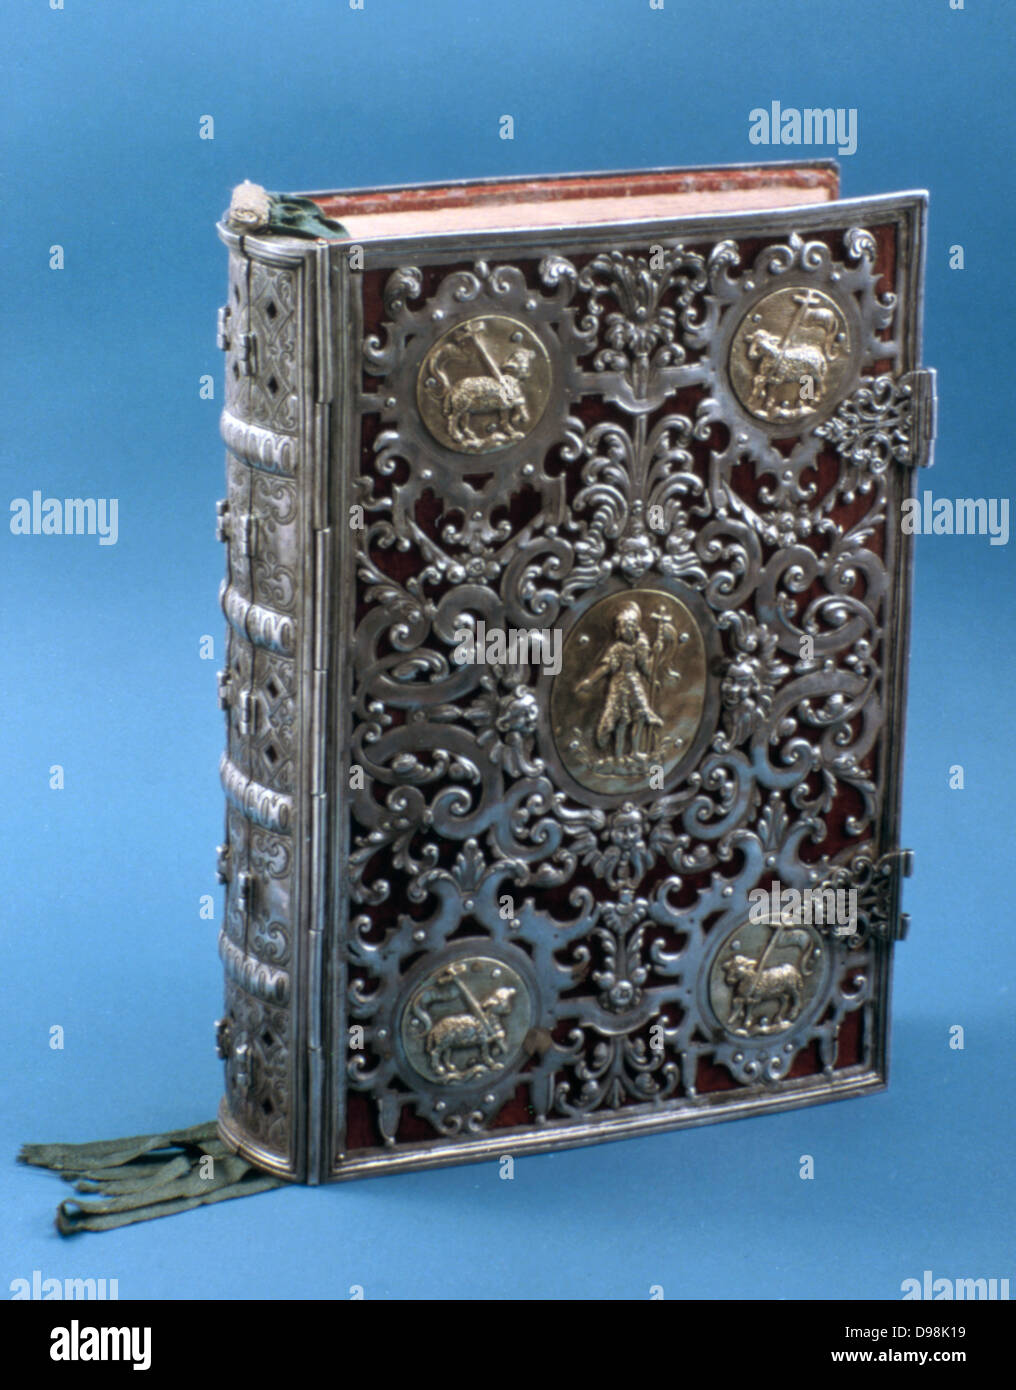 Missal with silver cover with roundels showing the Lamb of God. Liturgical book with text for celebration of Mass through the year. 17th century. Stock Photo